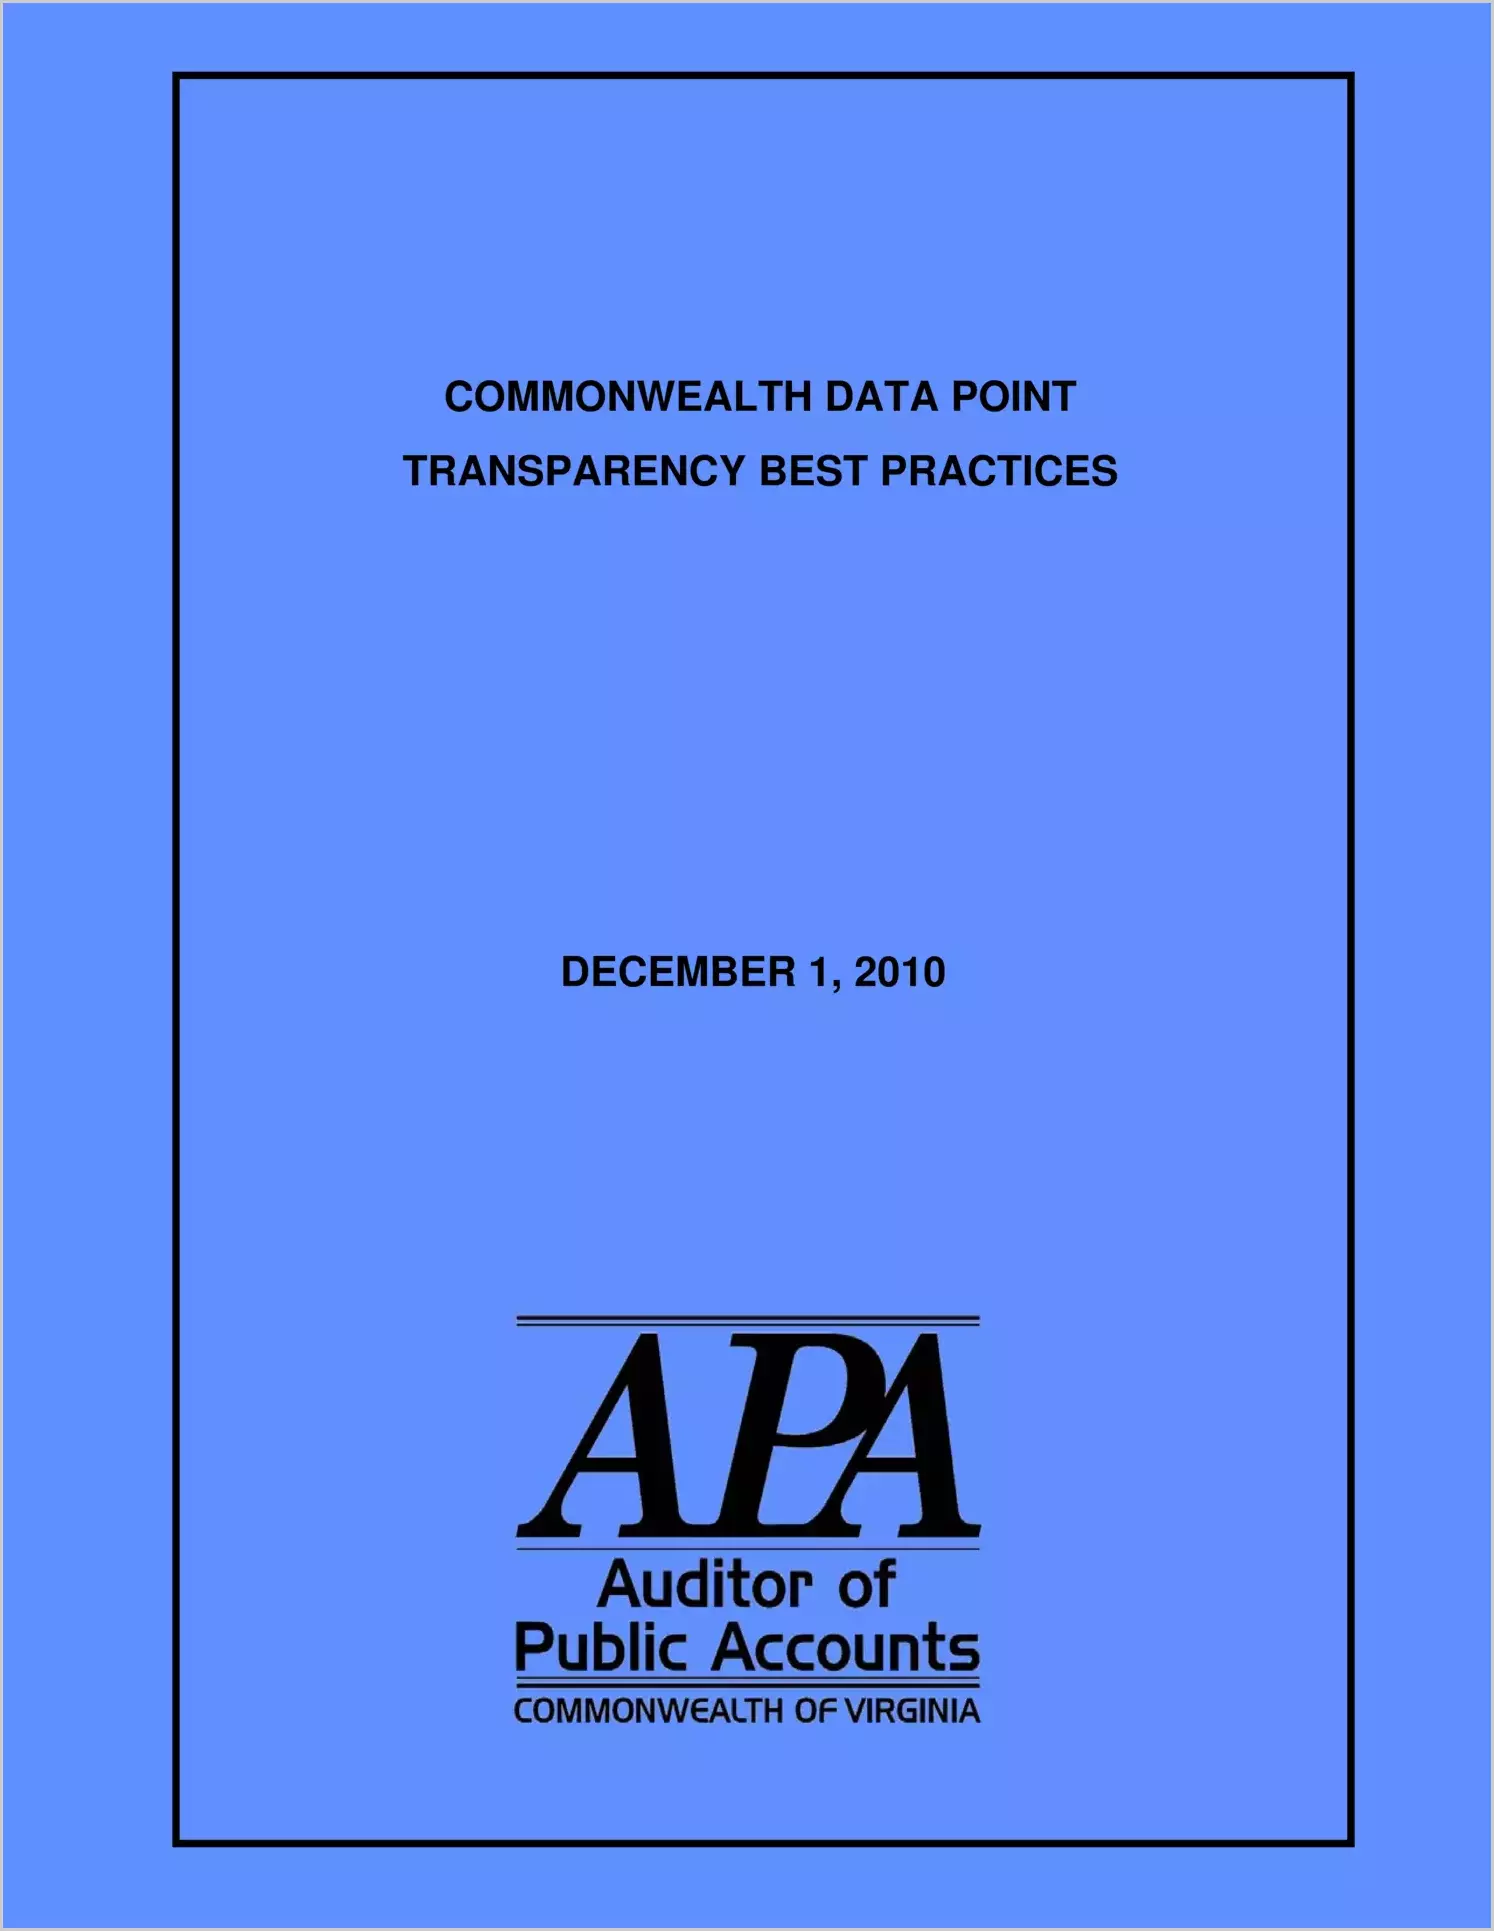 Commonwealth Data Point Transparency Best Practices as of December 1, 2010